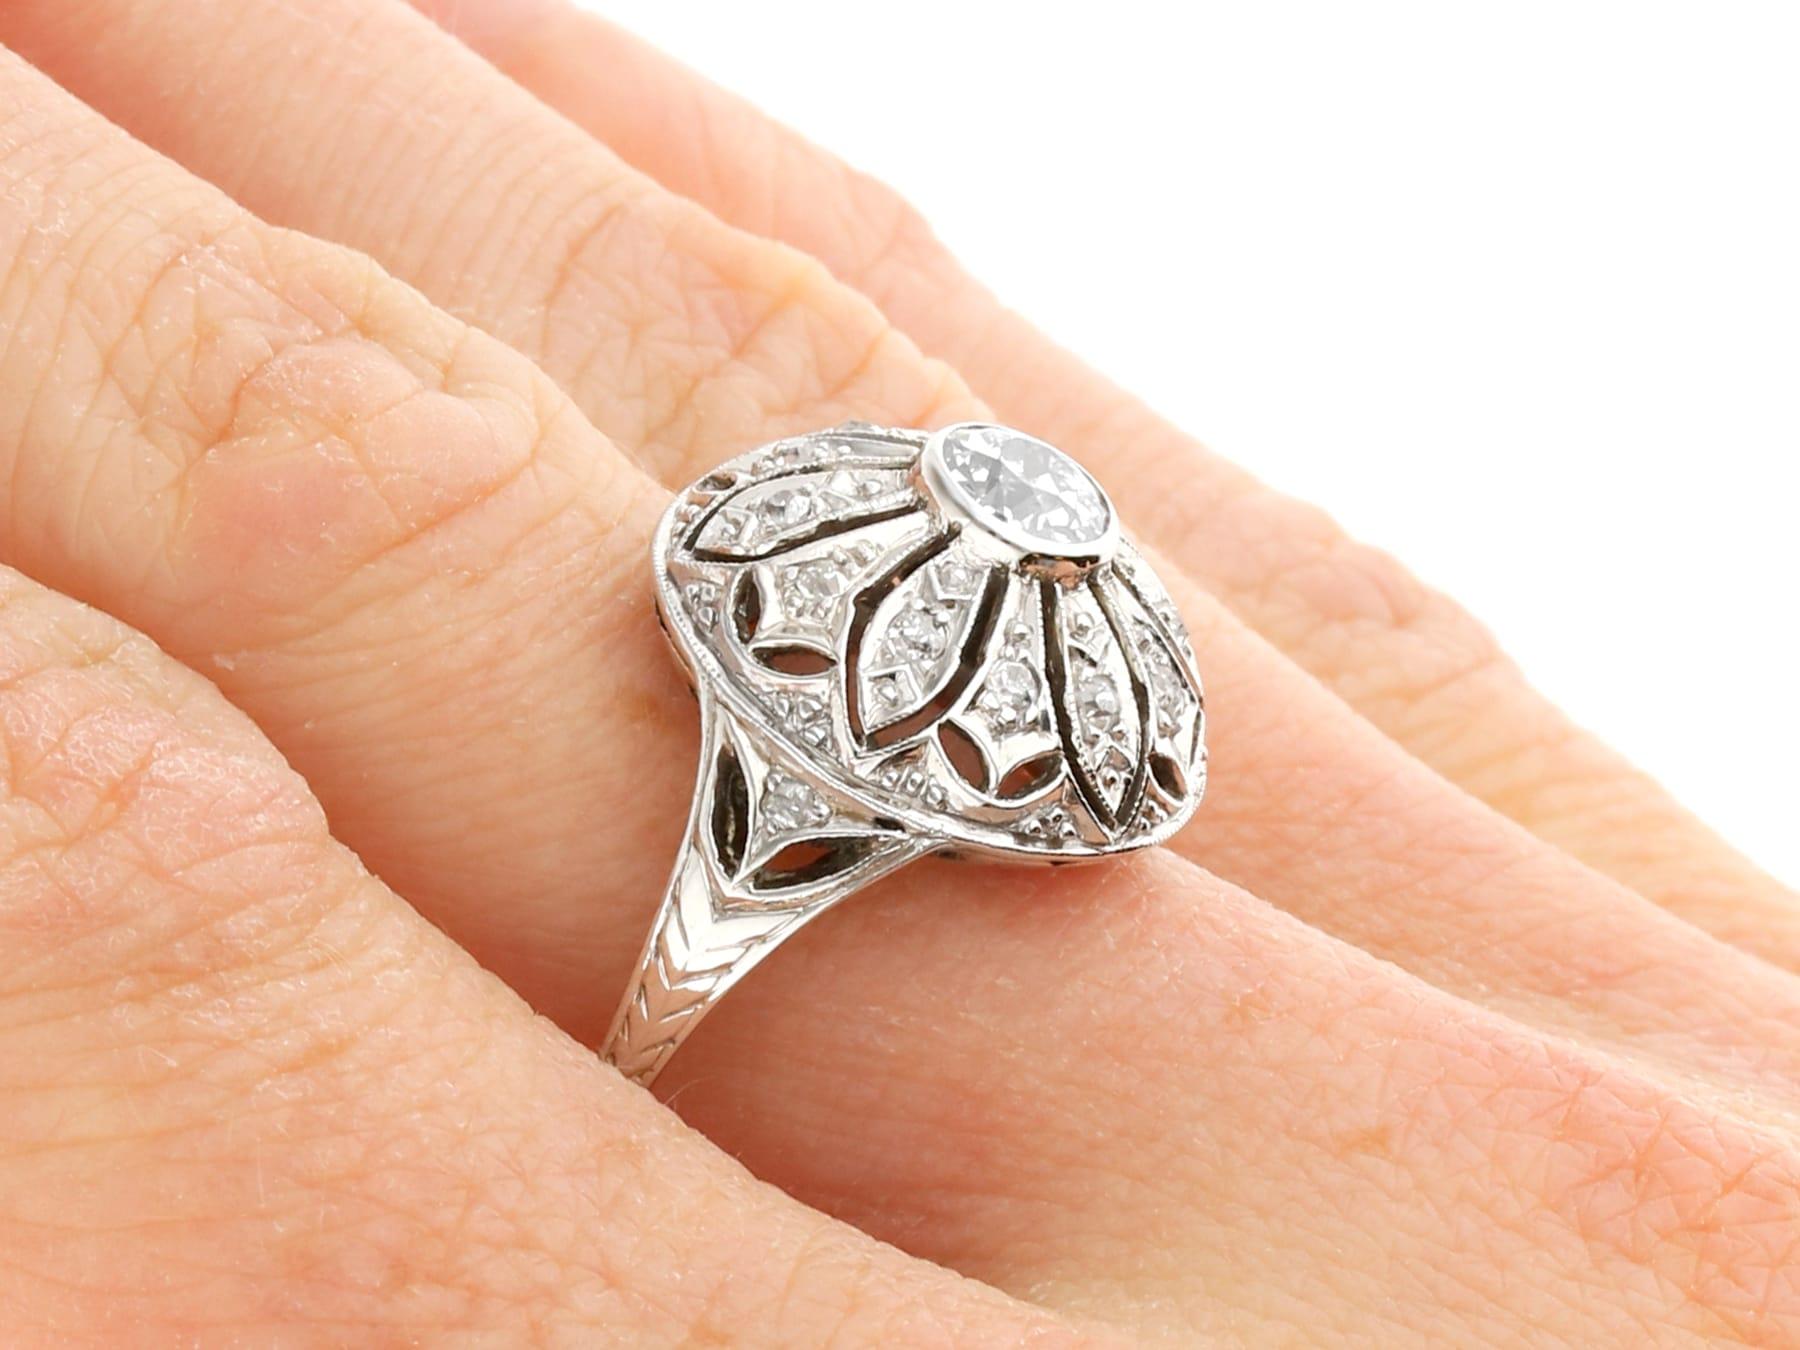 Antique 1920s 0.57 Carat Diamond and 14k White Gold Art Deco Cocktail Ring  For Sale 4